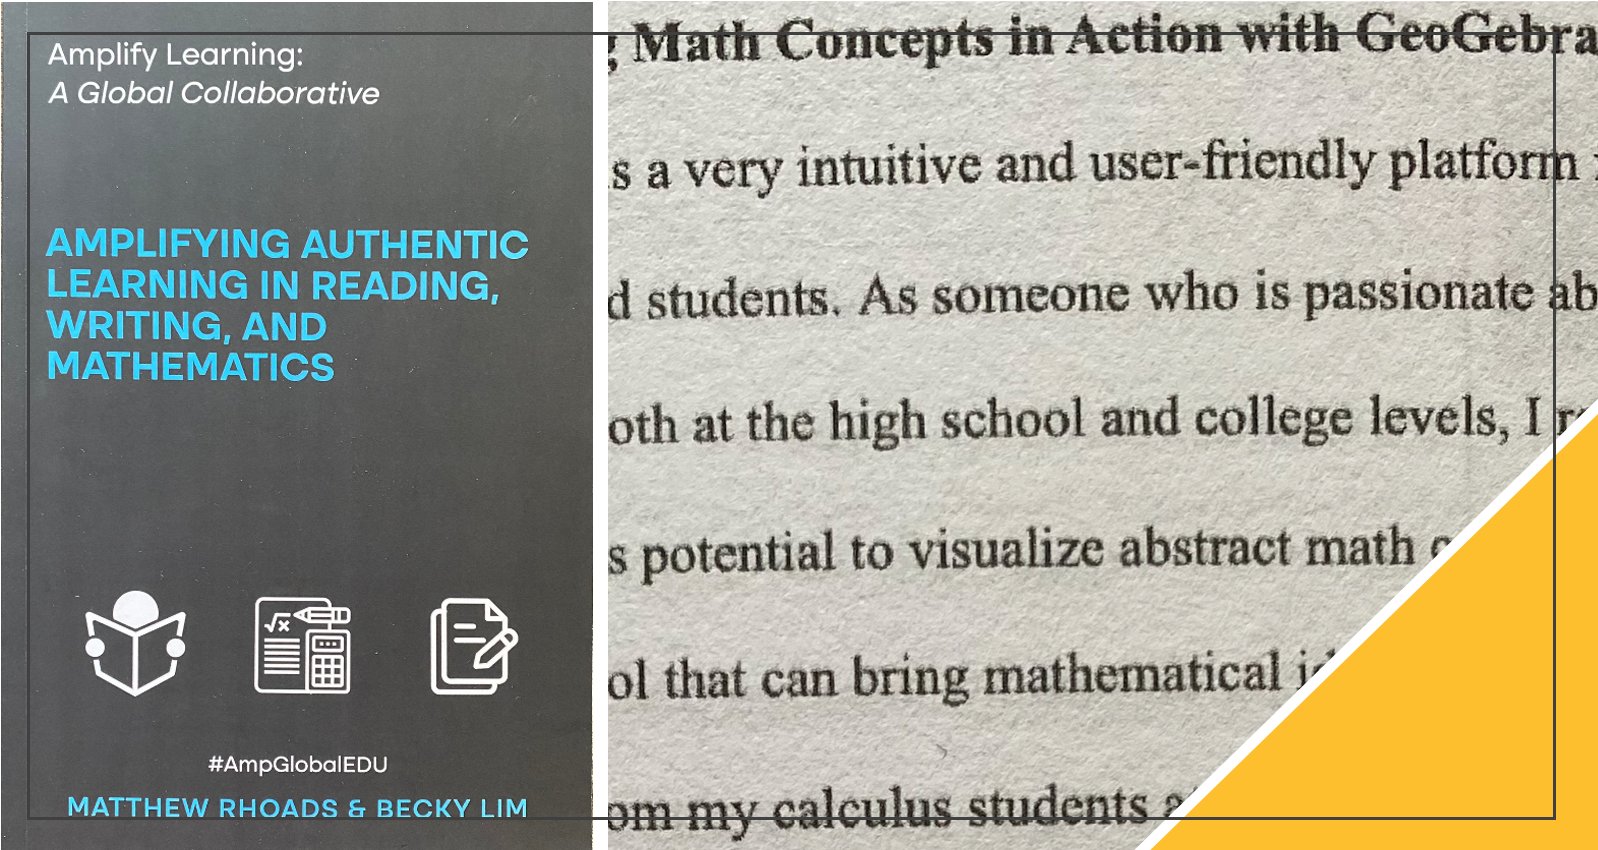 Amplifying Authentic Learning in Reading, Writing, and Mathematics